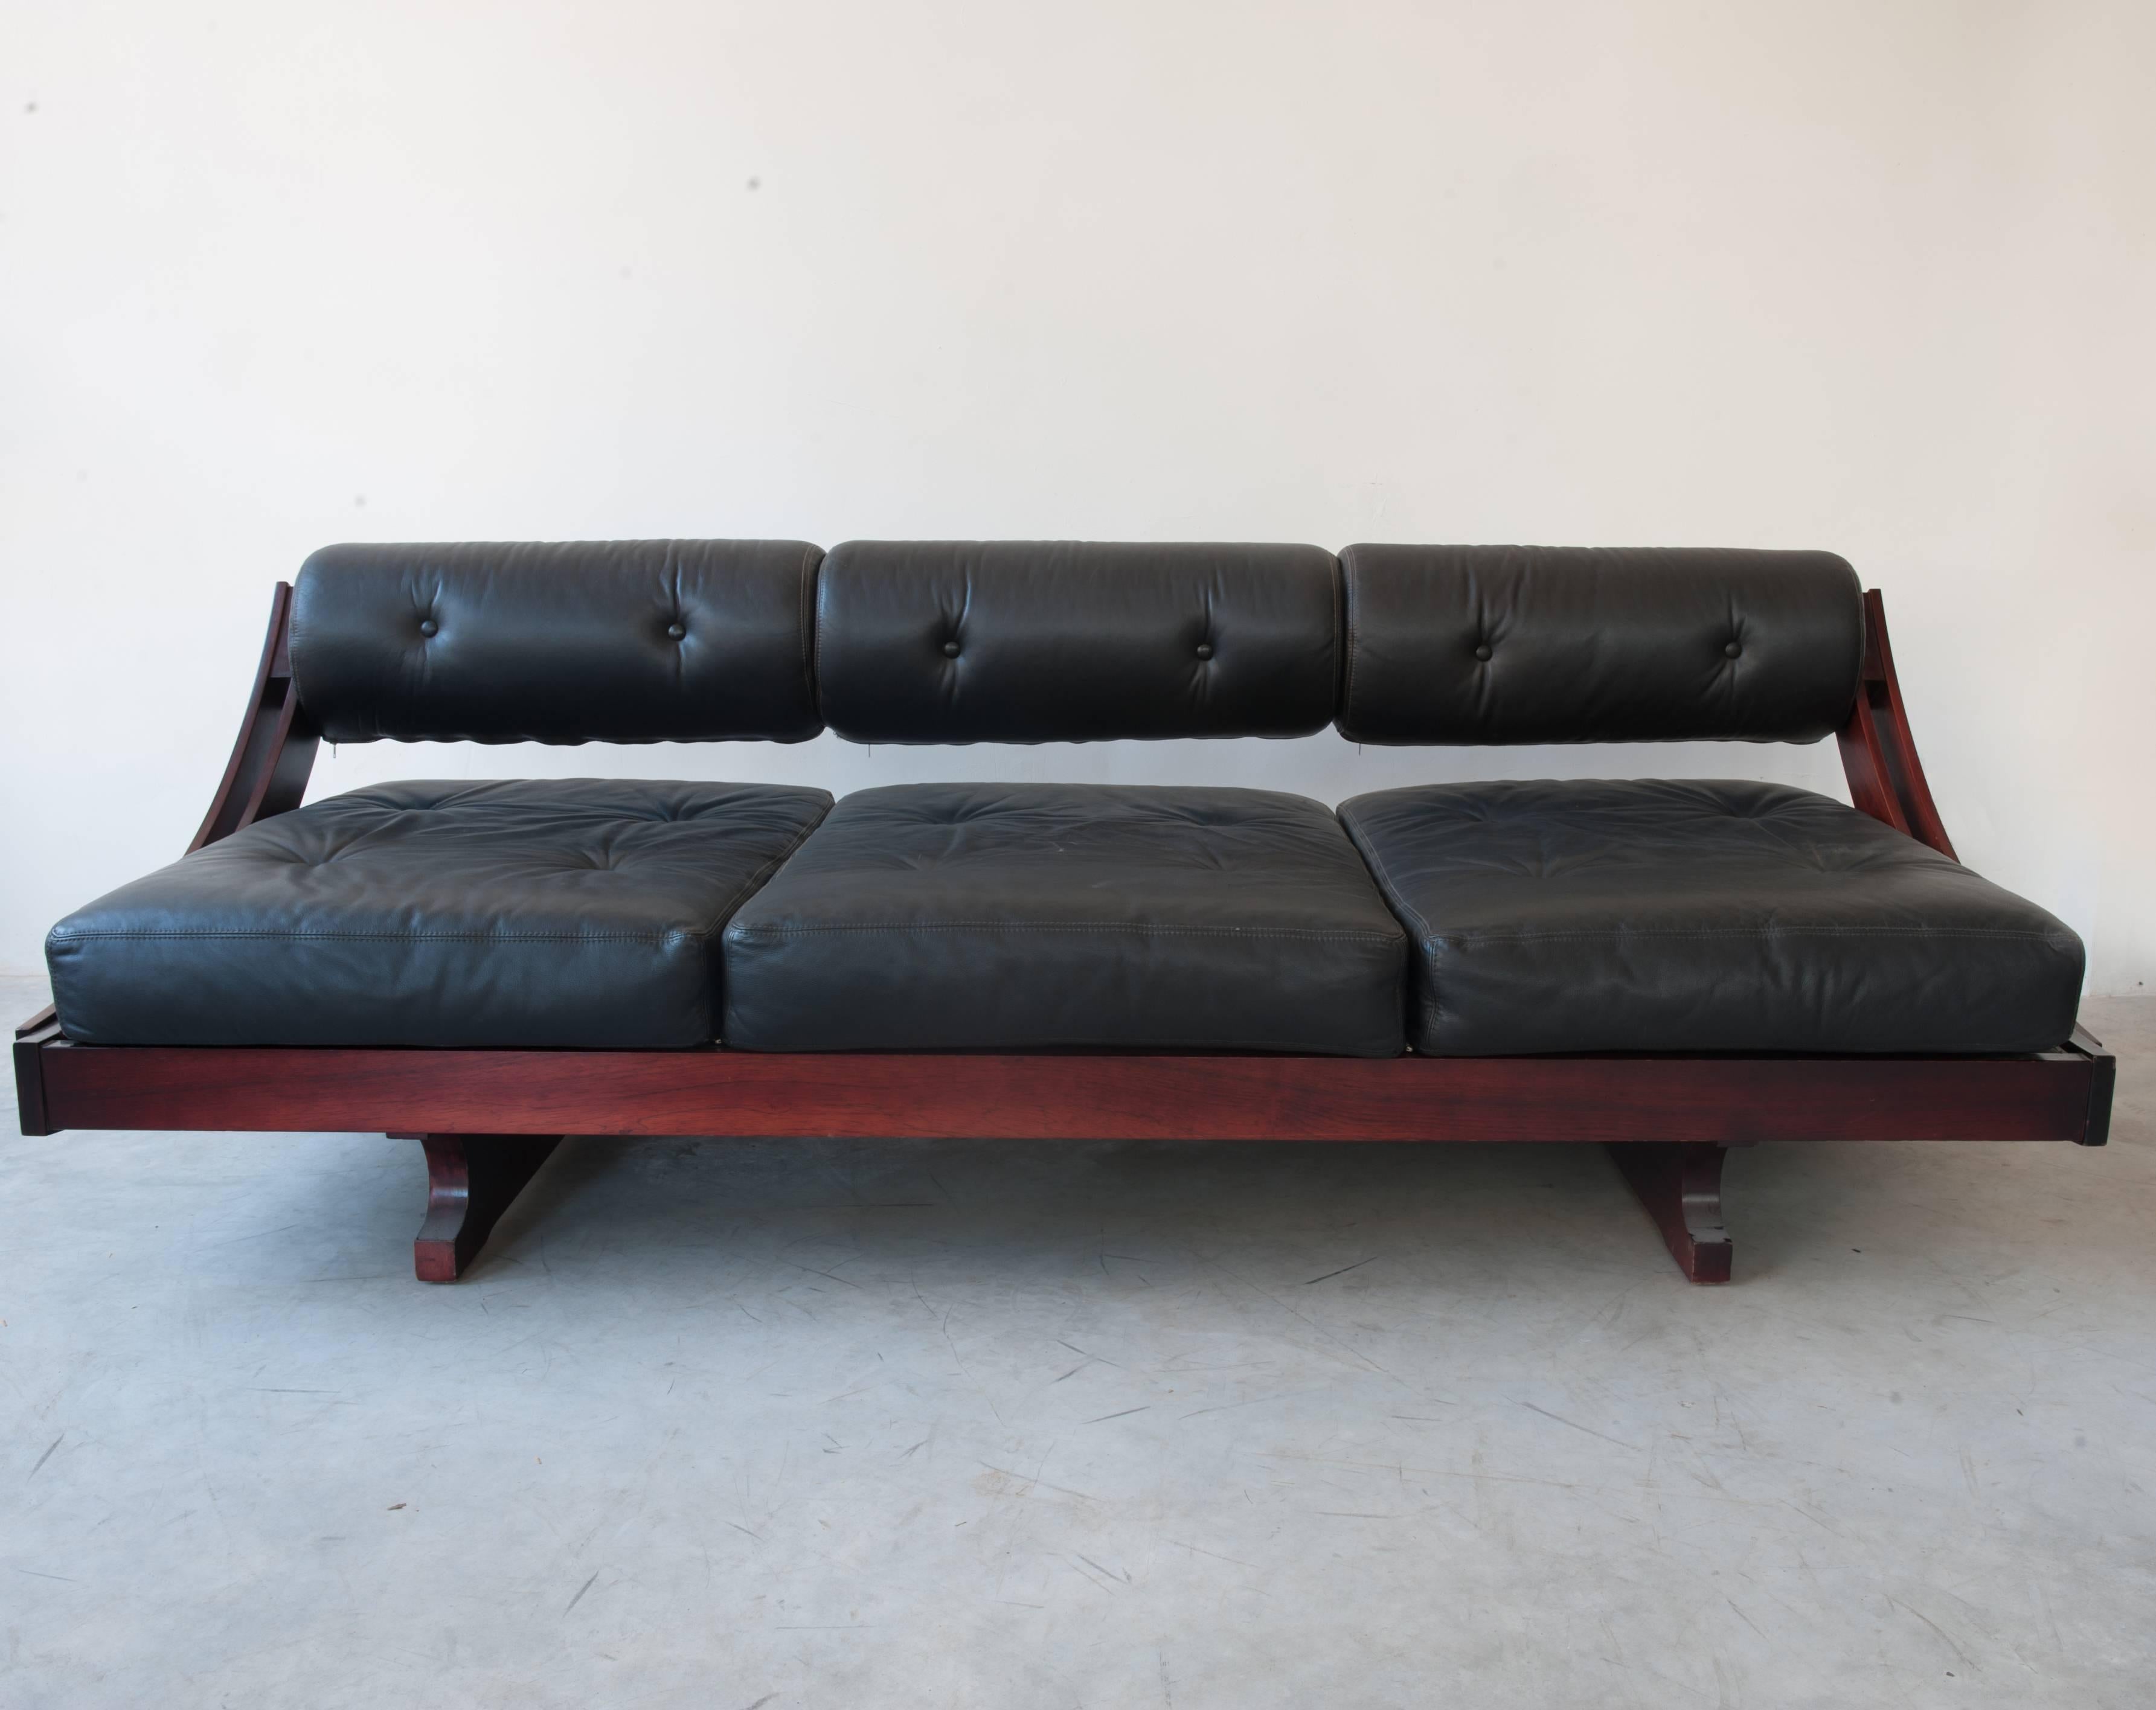 Very elegant and sculptural frame with a black original leather upholstery. 
The backrest can be adjusted in two positions to use as a sofa or daybed and is working properly. 
The soft original black leather cushions on the seat and backrest all